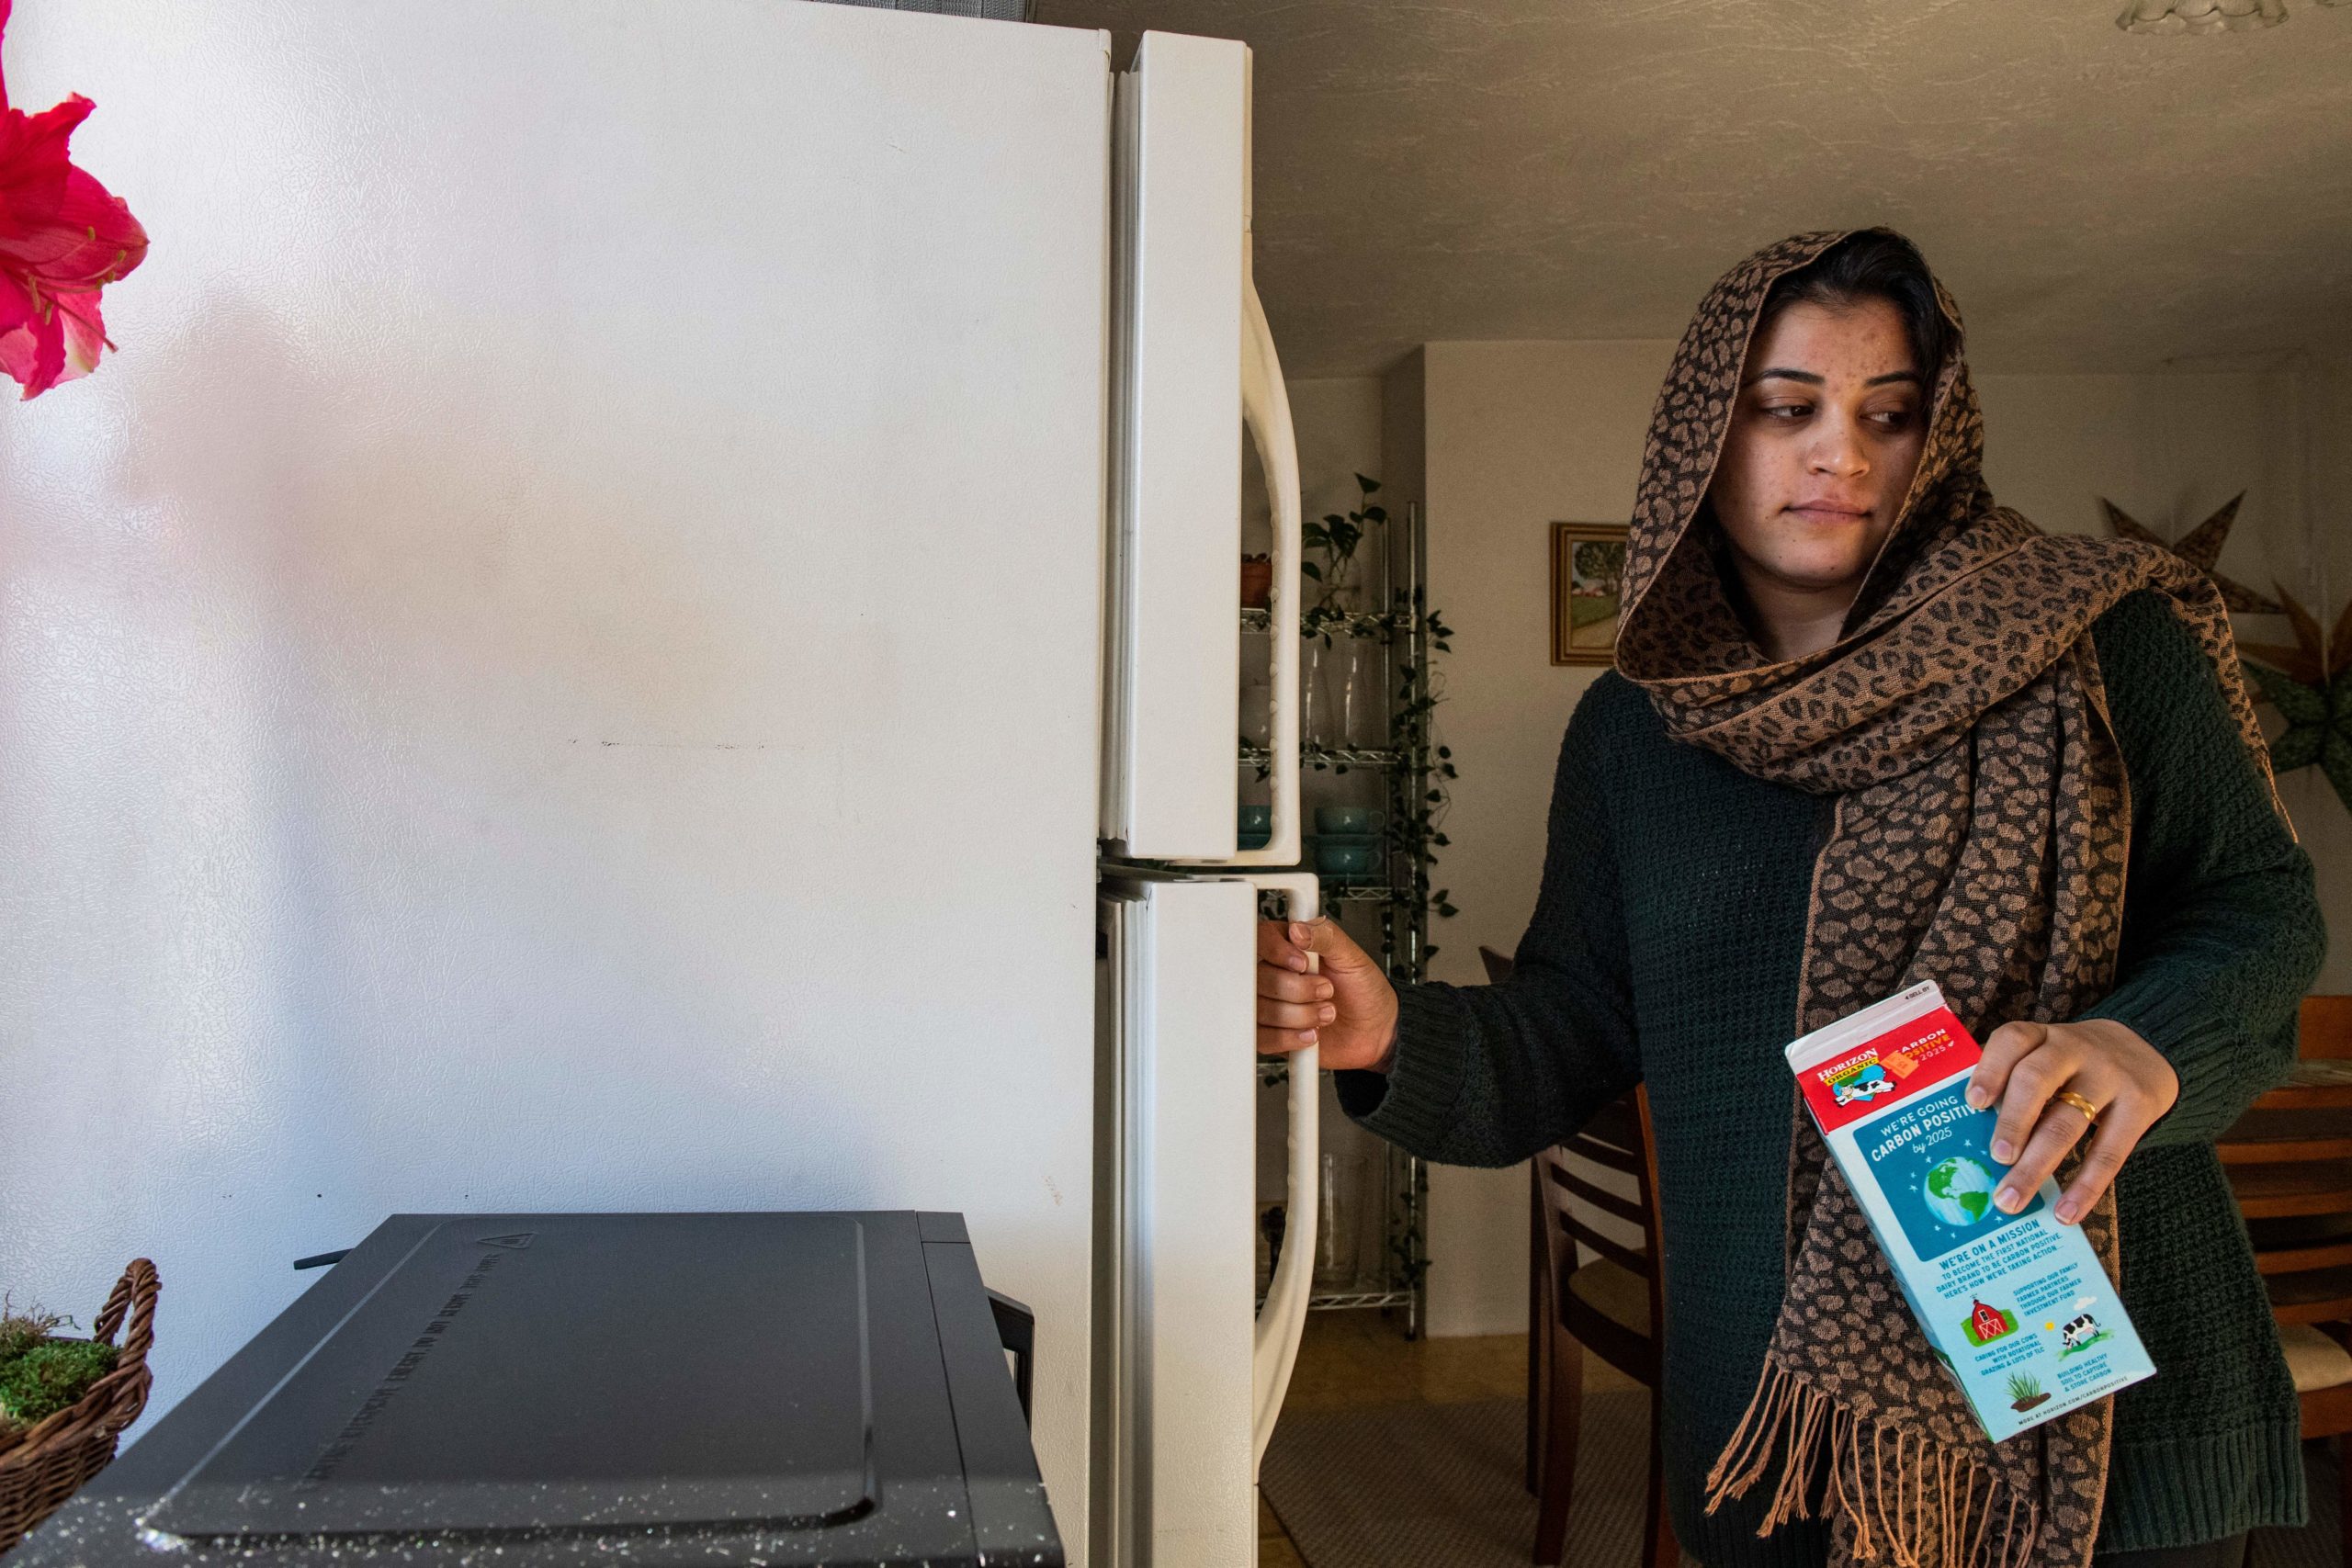 Afghani evacuee Sayeda, 23, prepares to make a morning smoothie, an American concept her and her husband Israr have been trying for a few weeks, in Charlestown, Massachusetts on February 21, 2022.